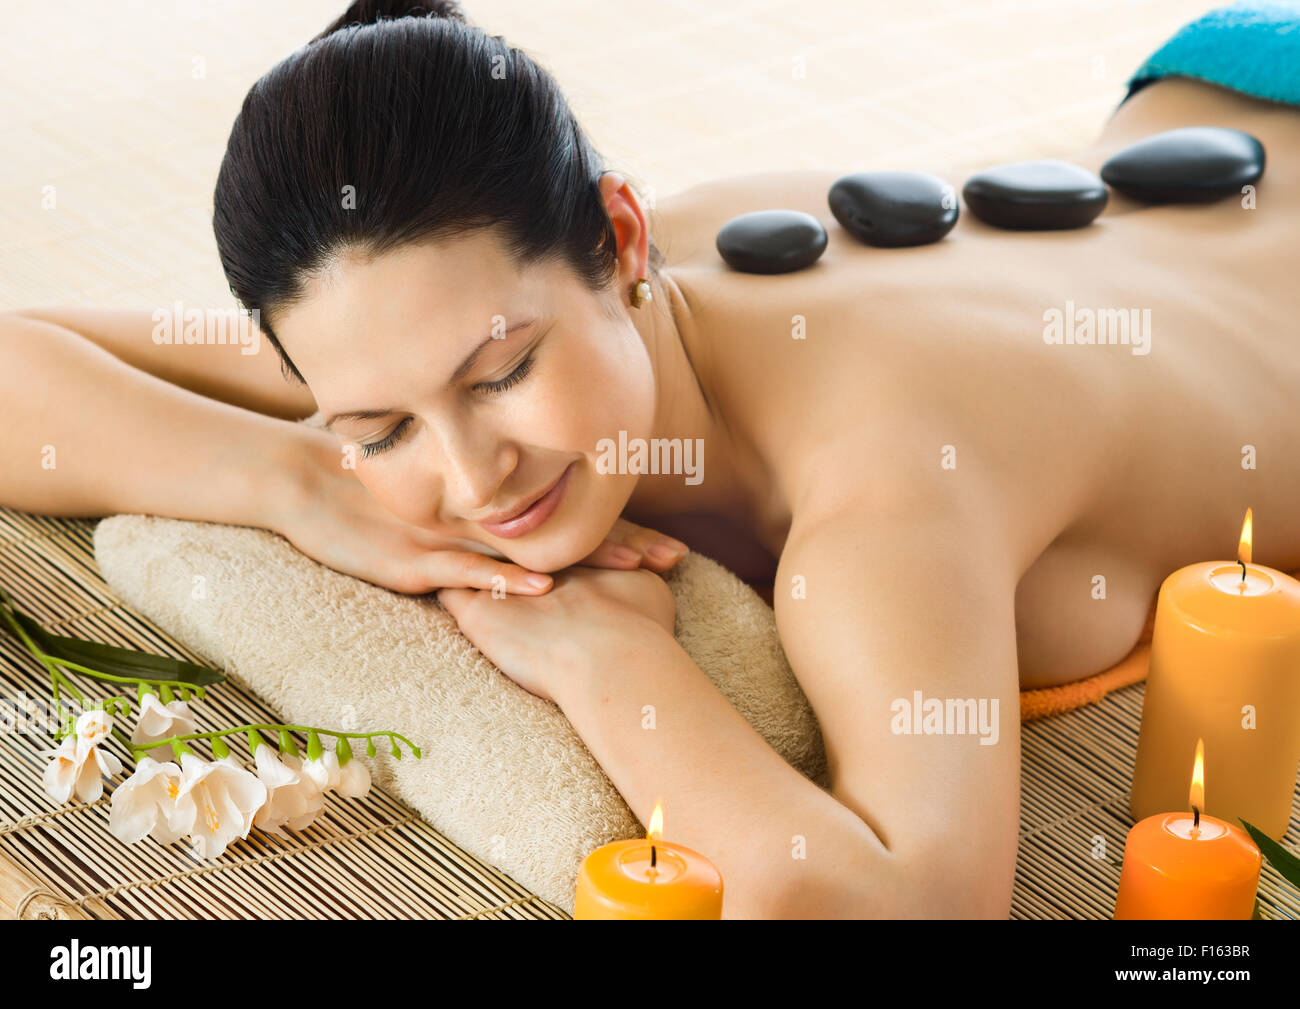 the very  pretty  young woman on spa treatment , horizontal  portrait Stock Photo